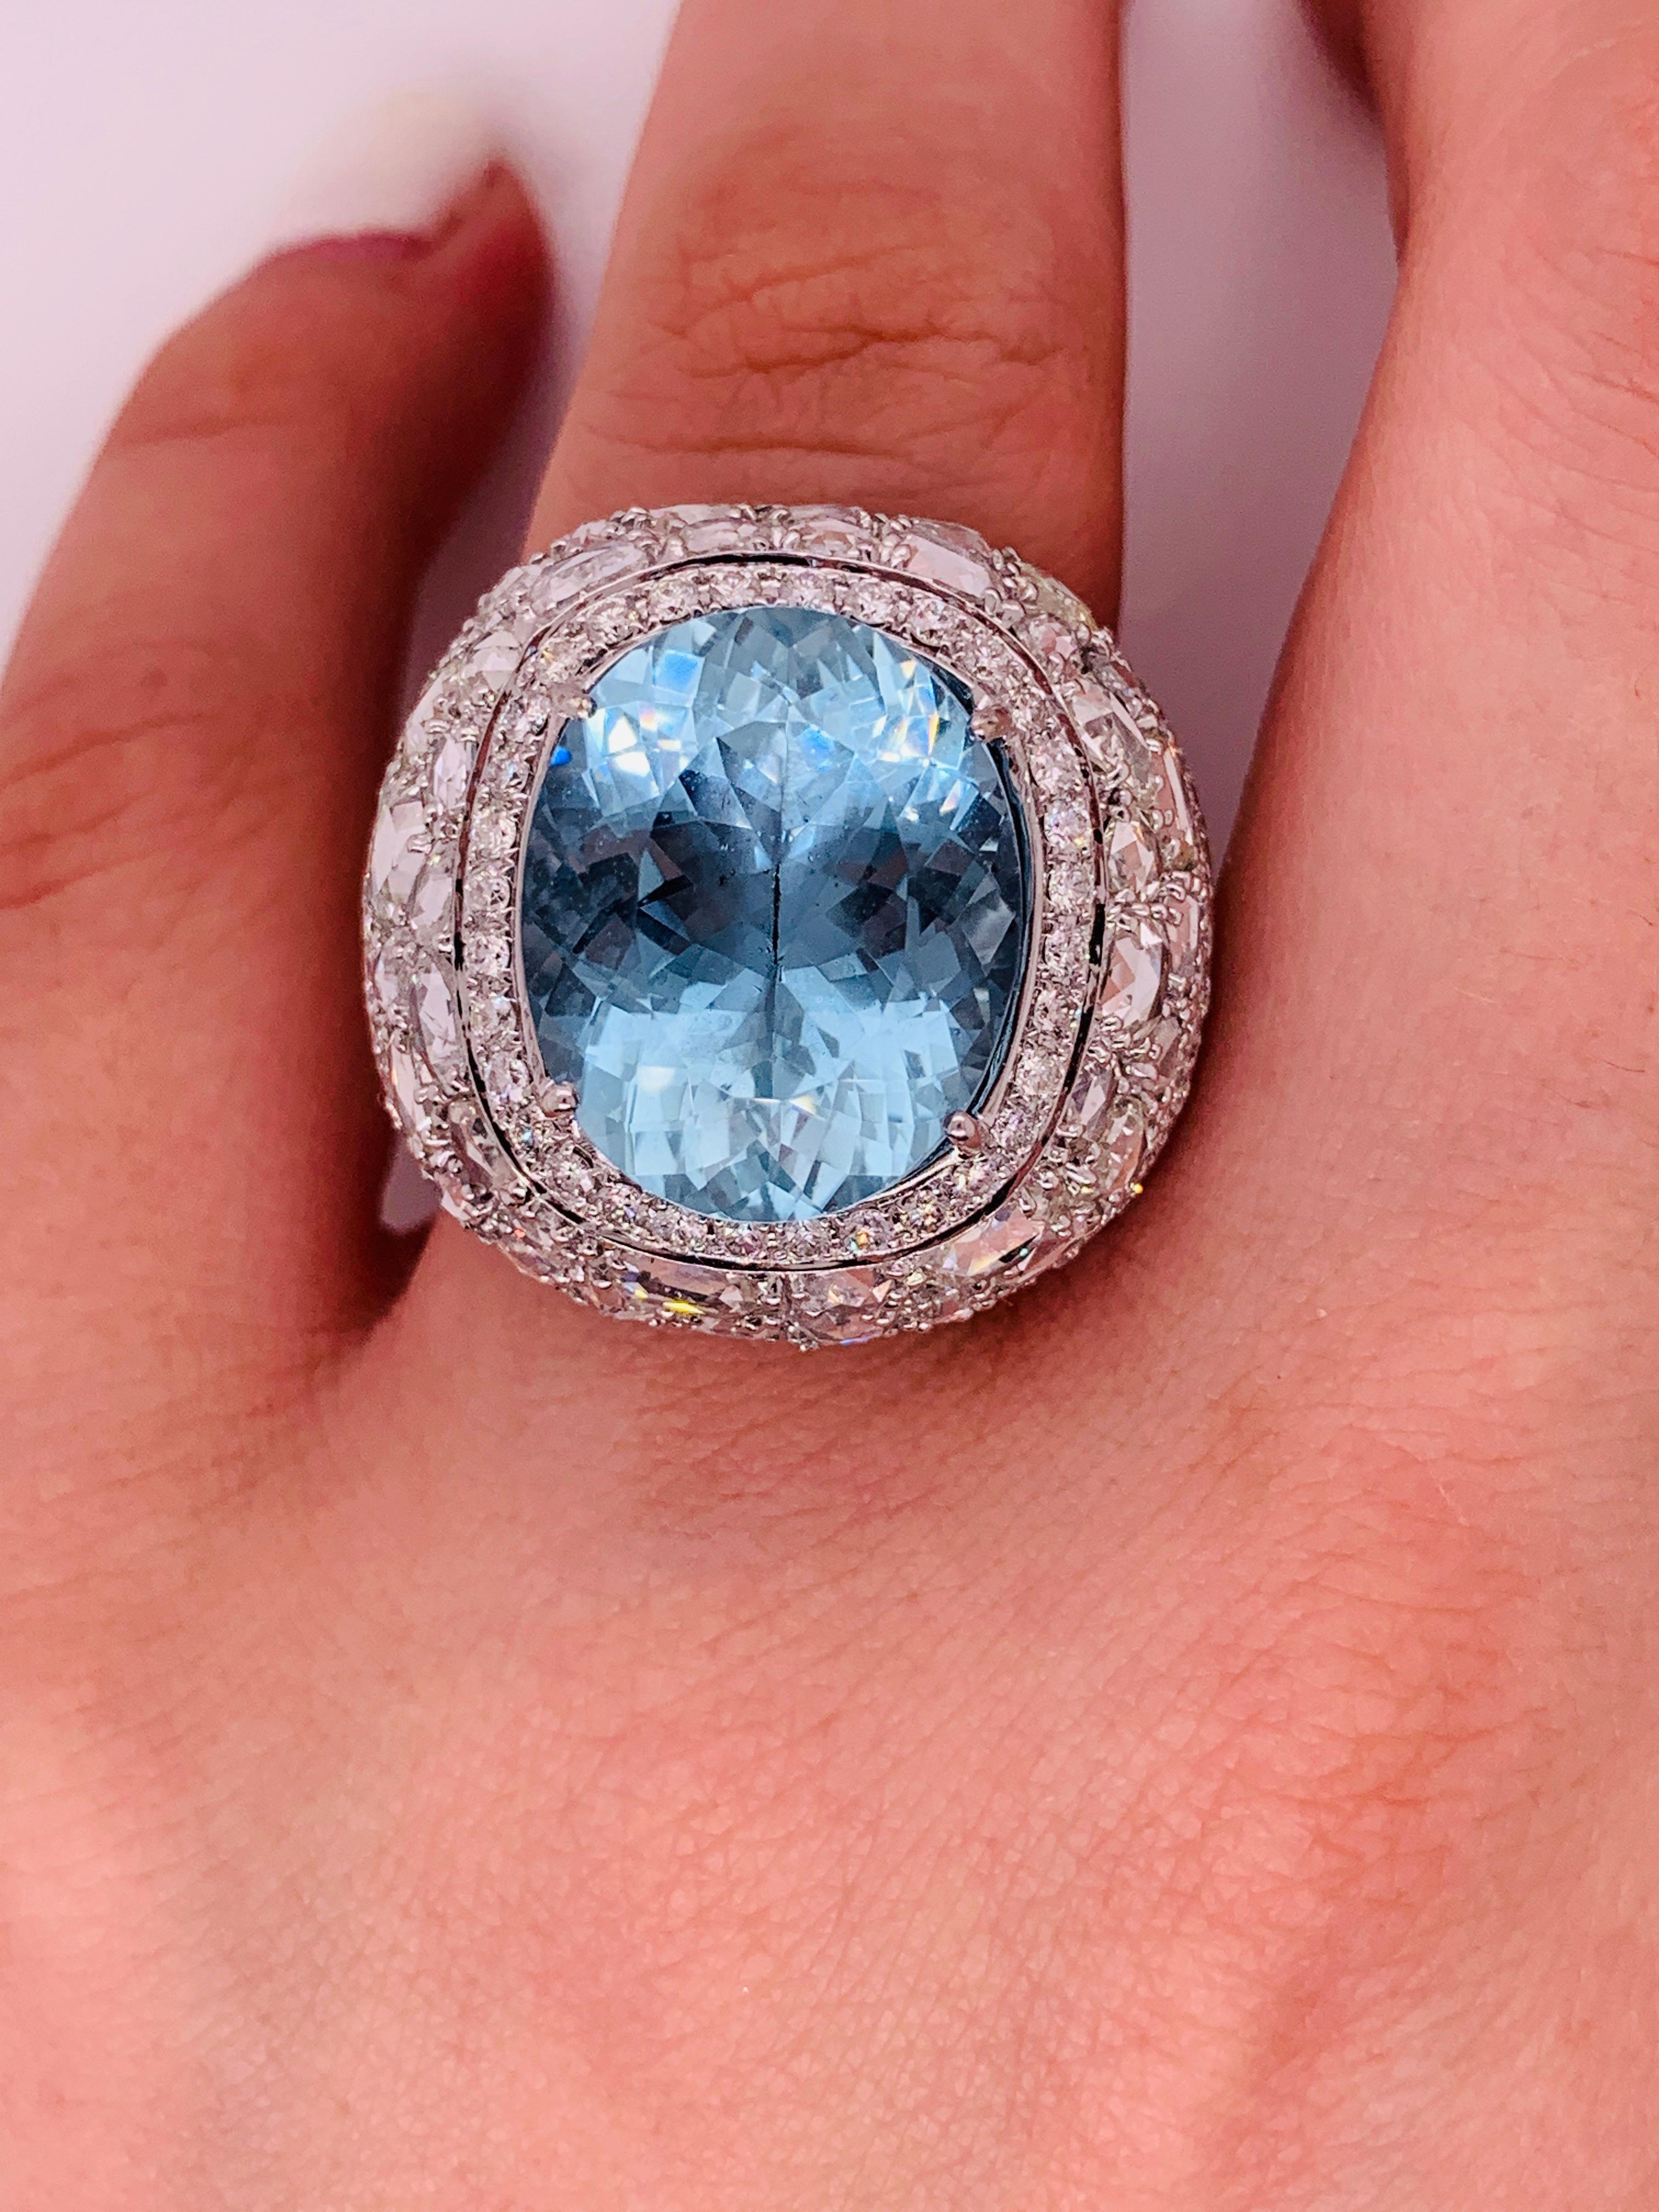 Exquisite Aquamarine and Rose cut Diamond ring
18K white gold ring with aquamarine center stone surrounded by rose and round brilliant cut diamonds.
Composition:
18K white gold
13.46 carat aquamarine
6.00 ct diamonds
Can be resized to any